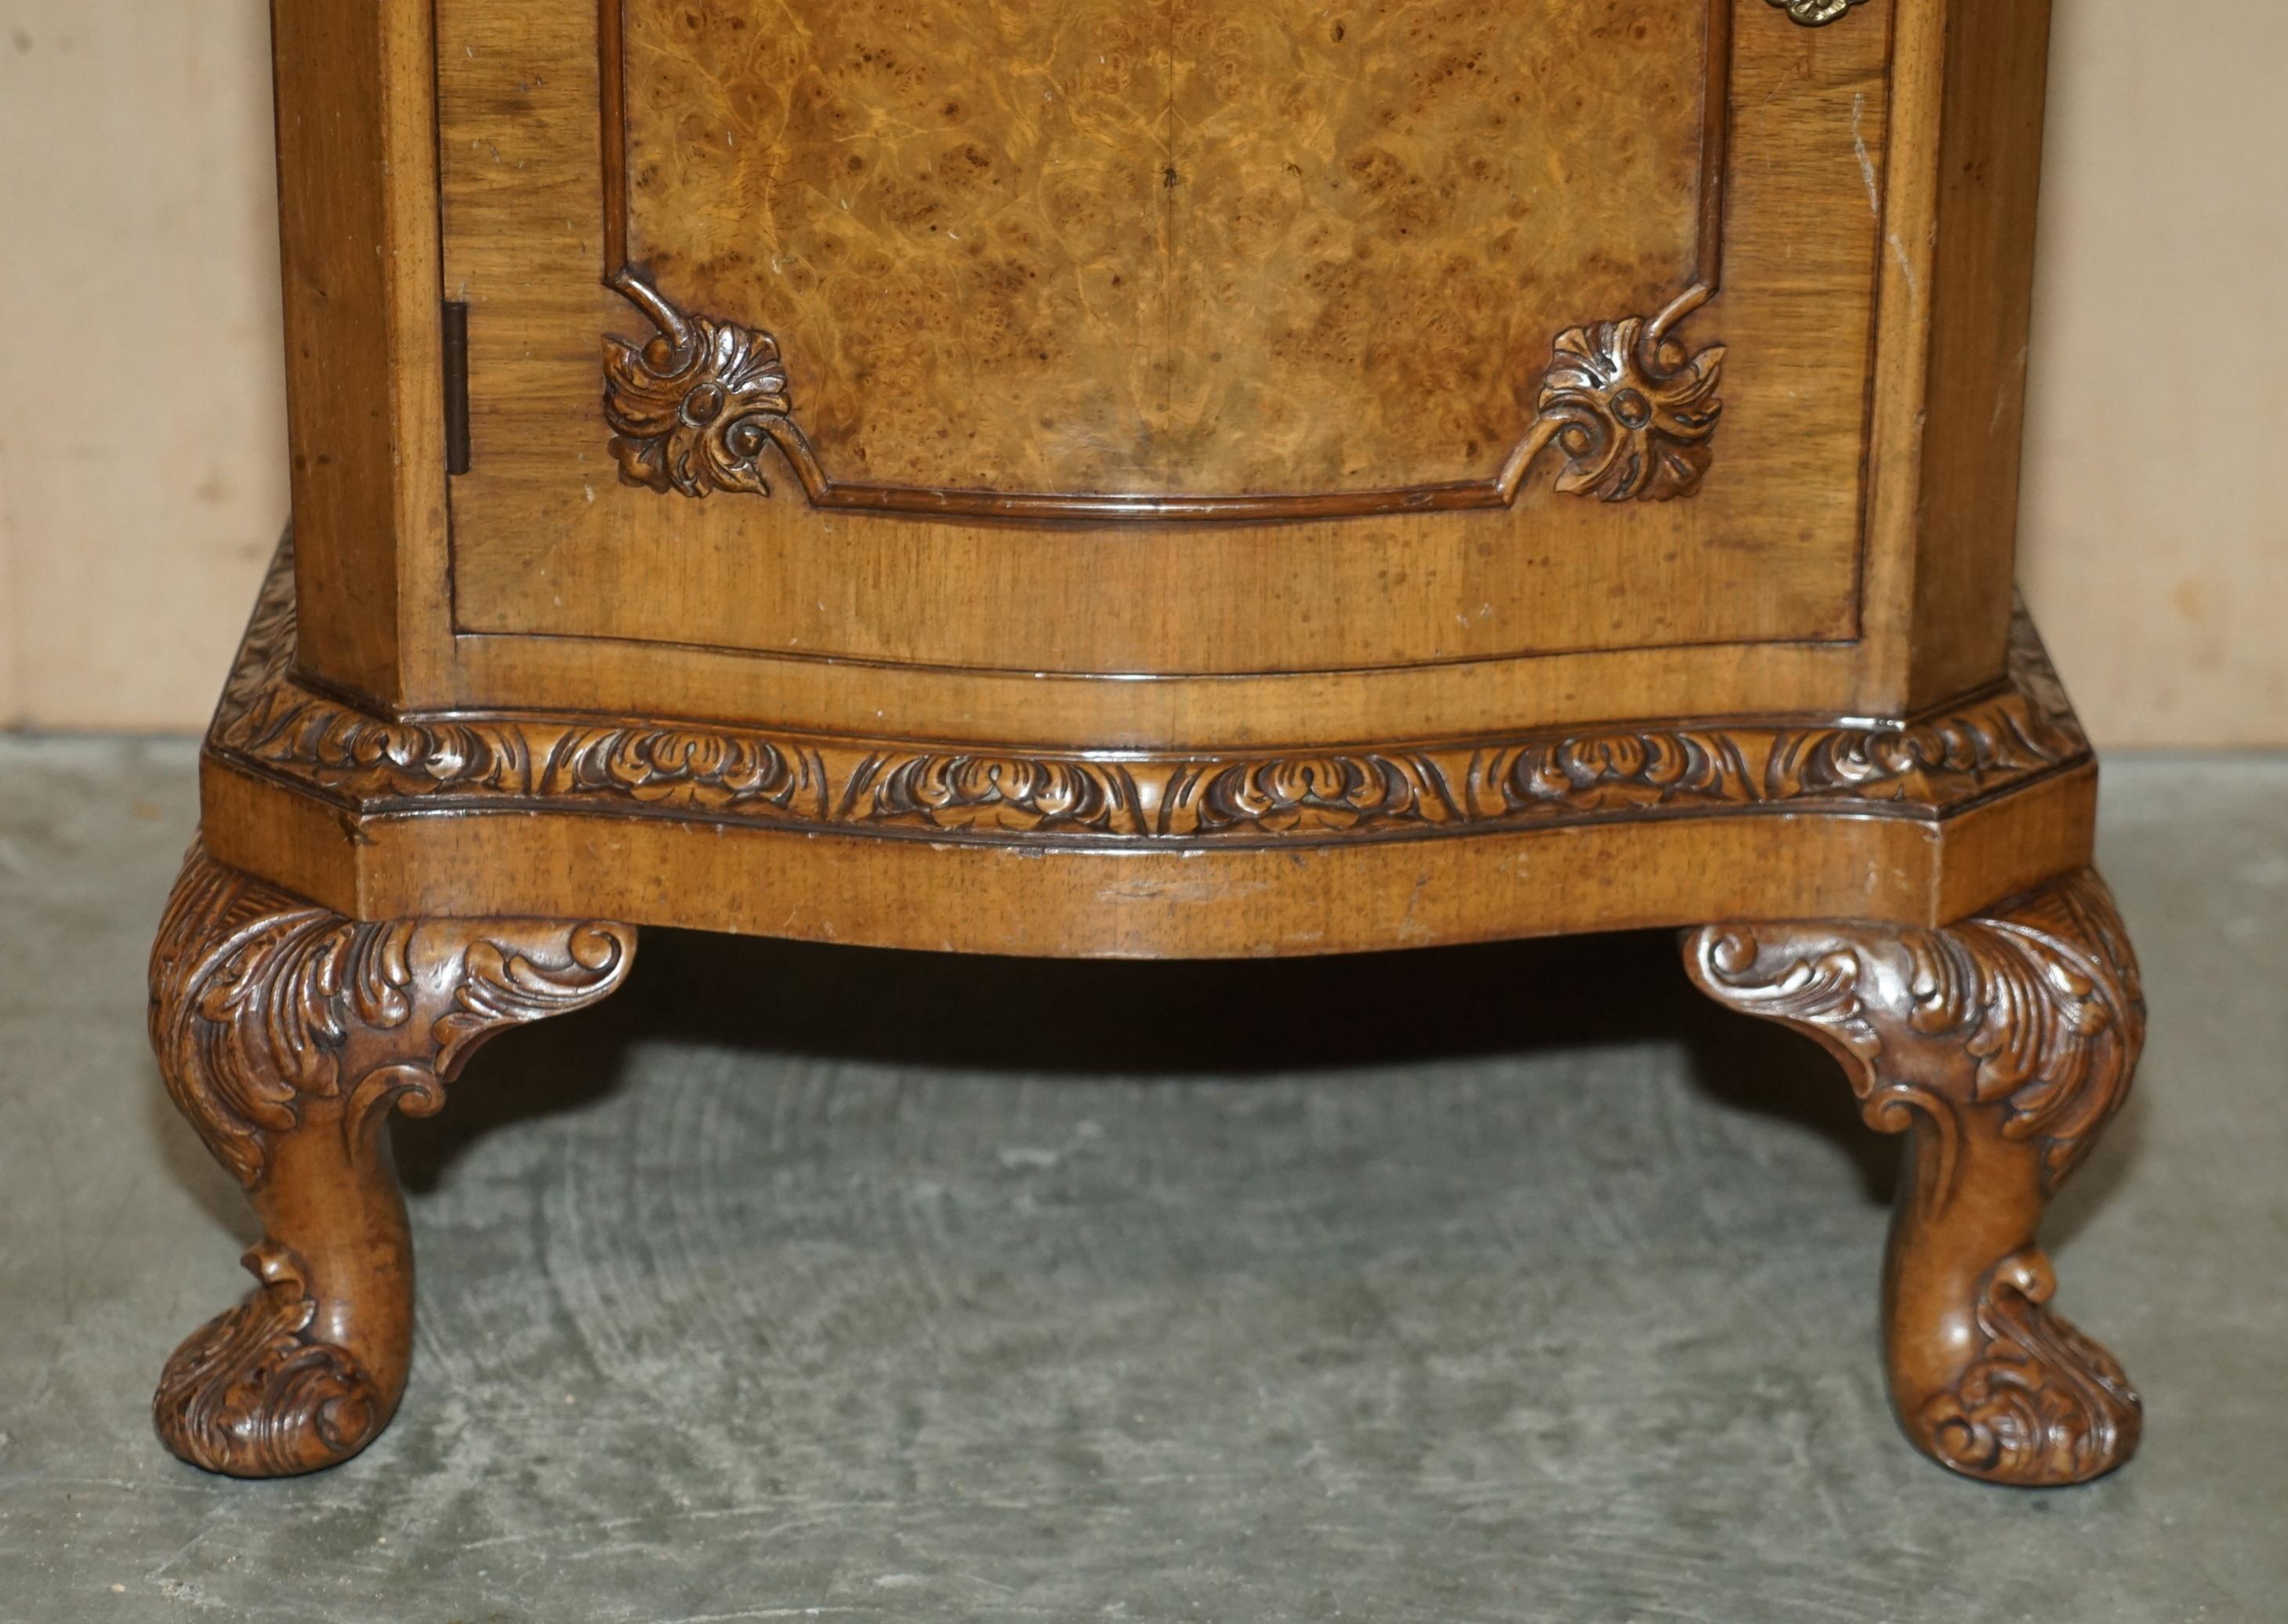 20th Century Pair of Antique Burr Walnut Satinwood Bedside Tables Butlers Slip Serving Trays